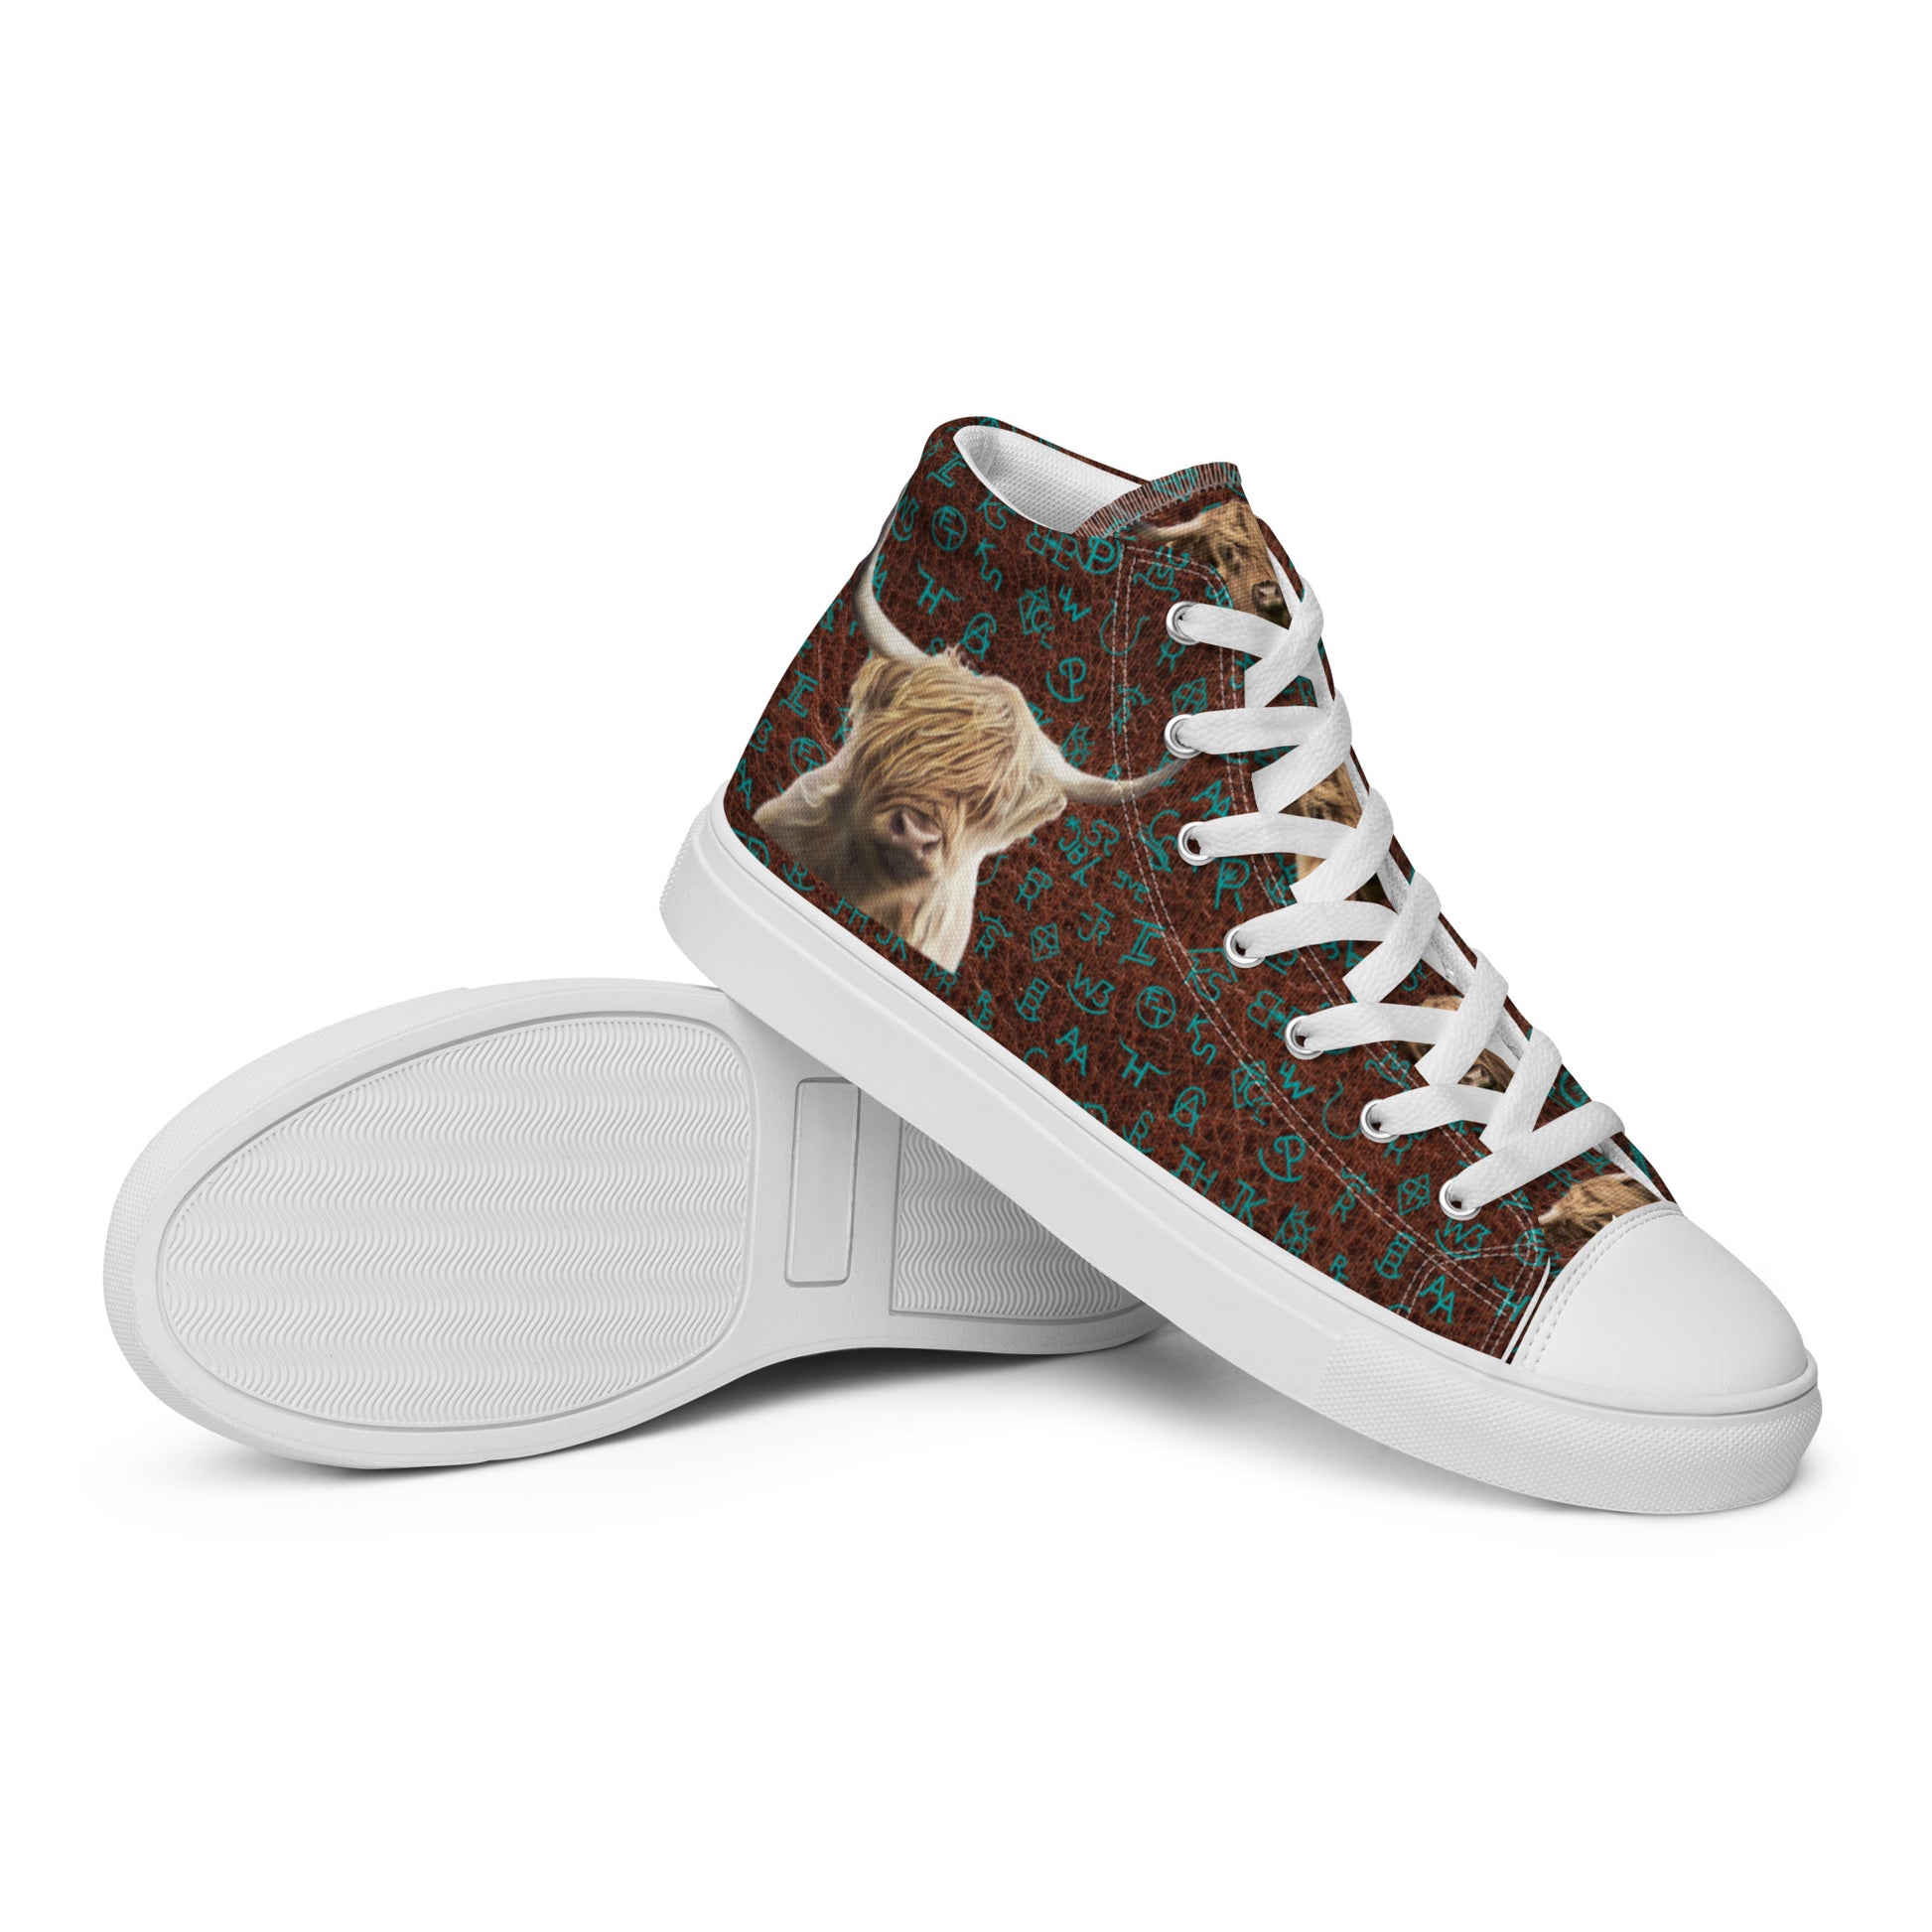 Highlands and Brands Women’s High Top Canvas Shoes 10.5